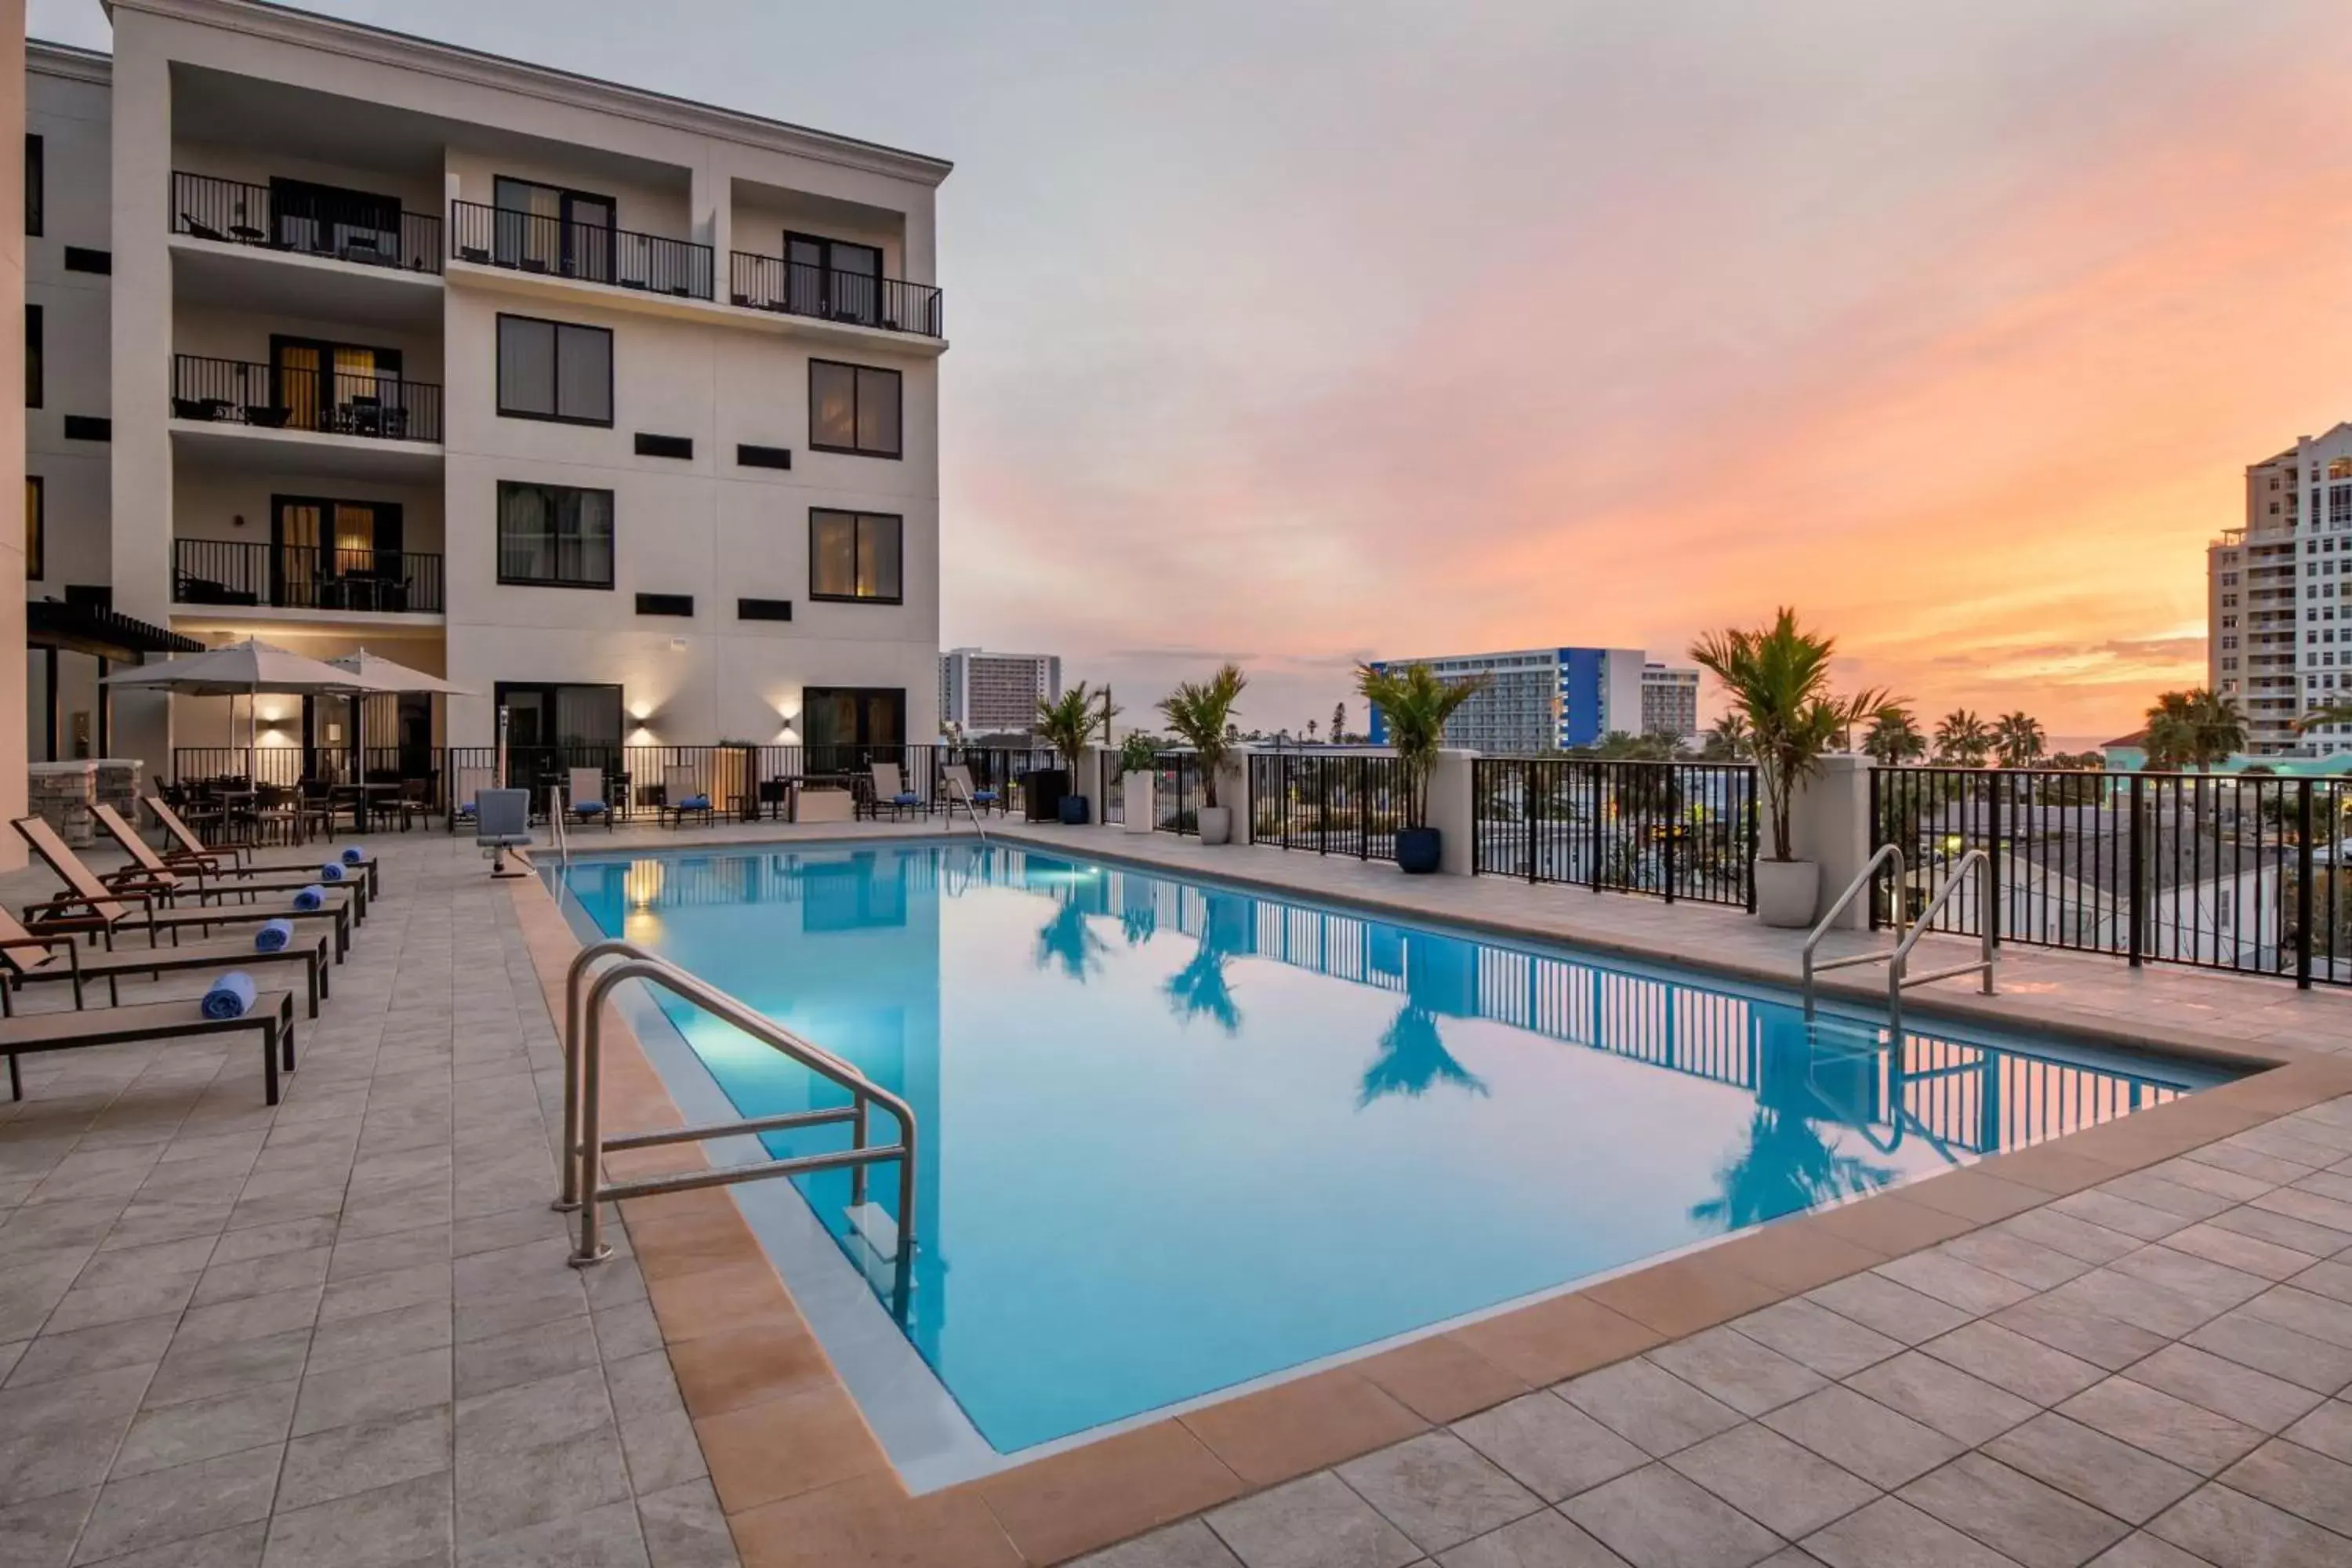 Property building, Swimming Pool in Courtyard by Marriott Clearwater Beach